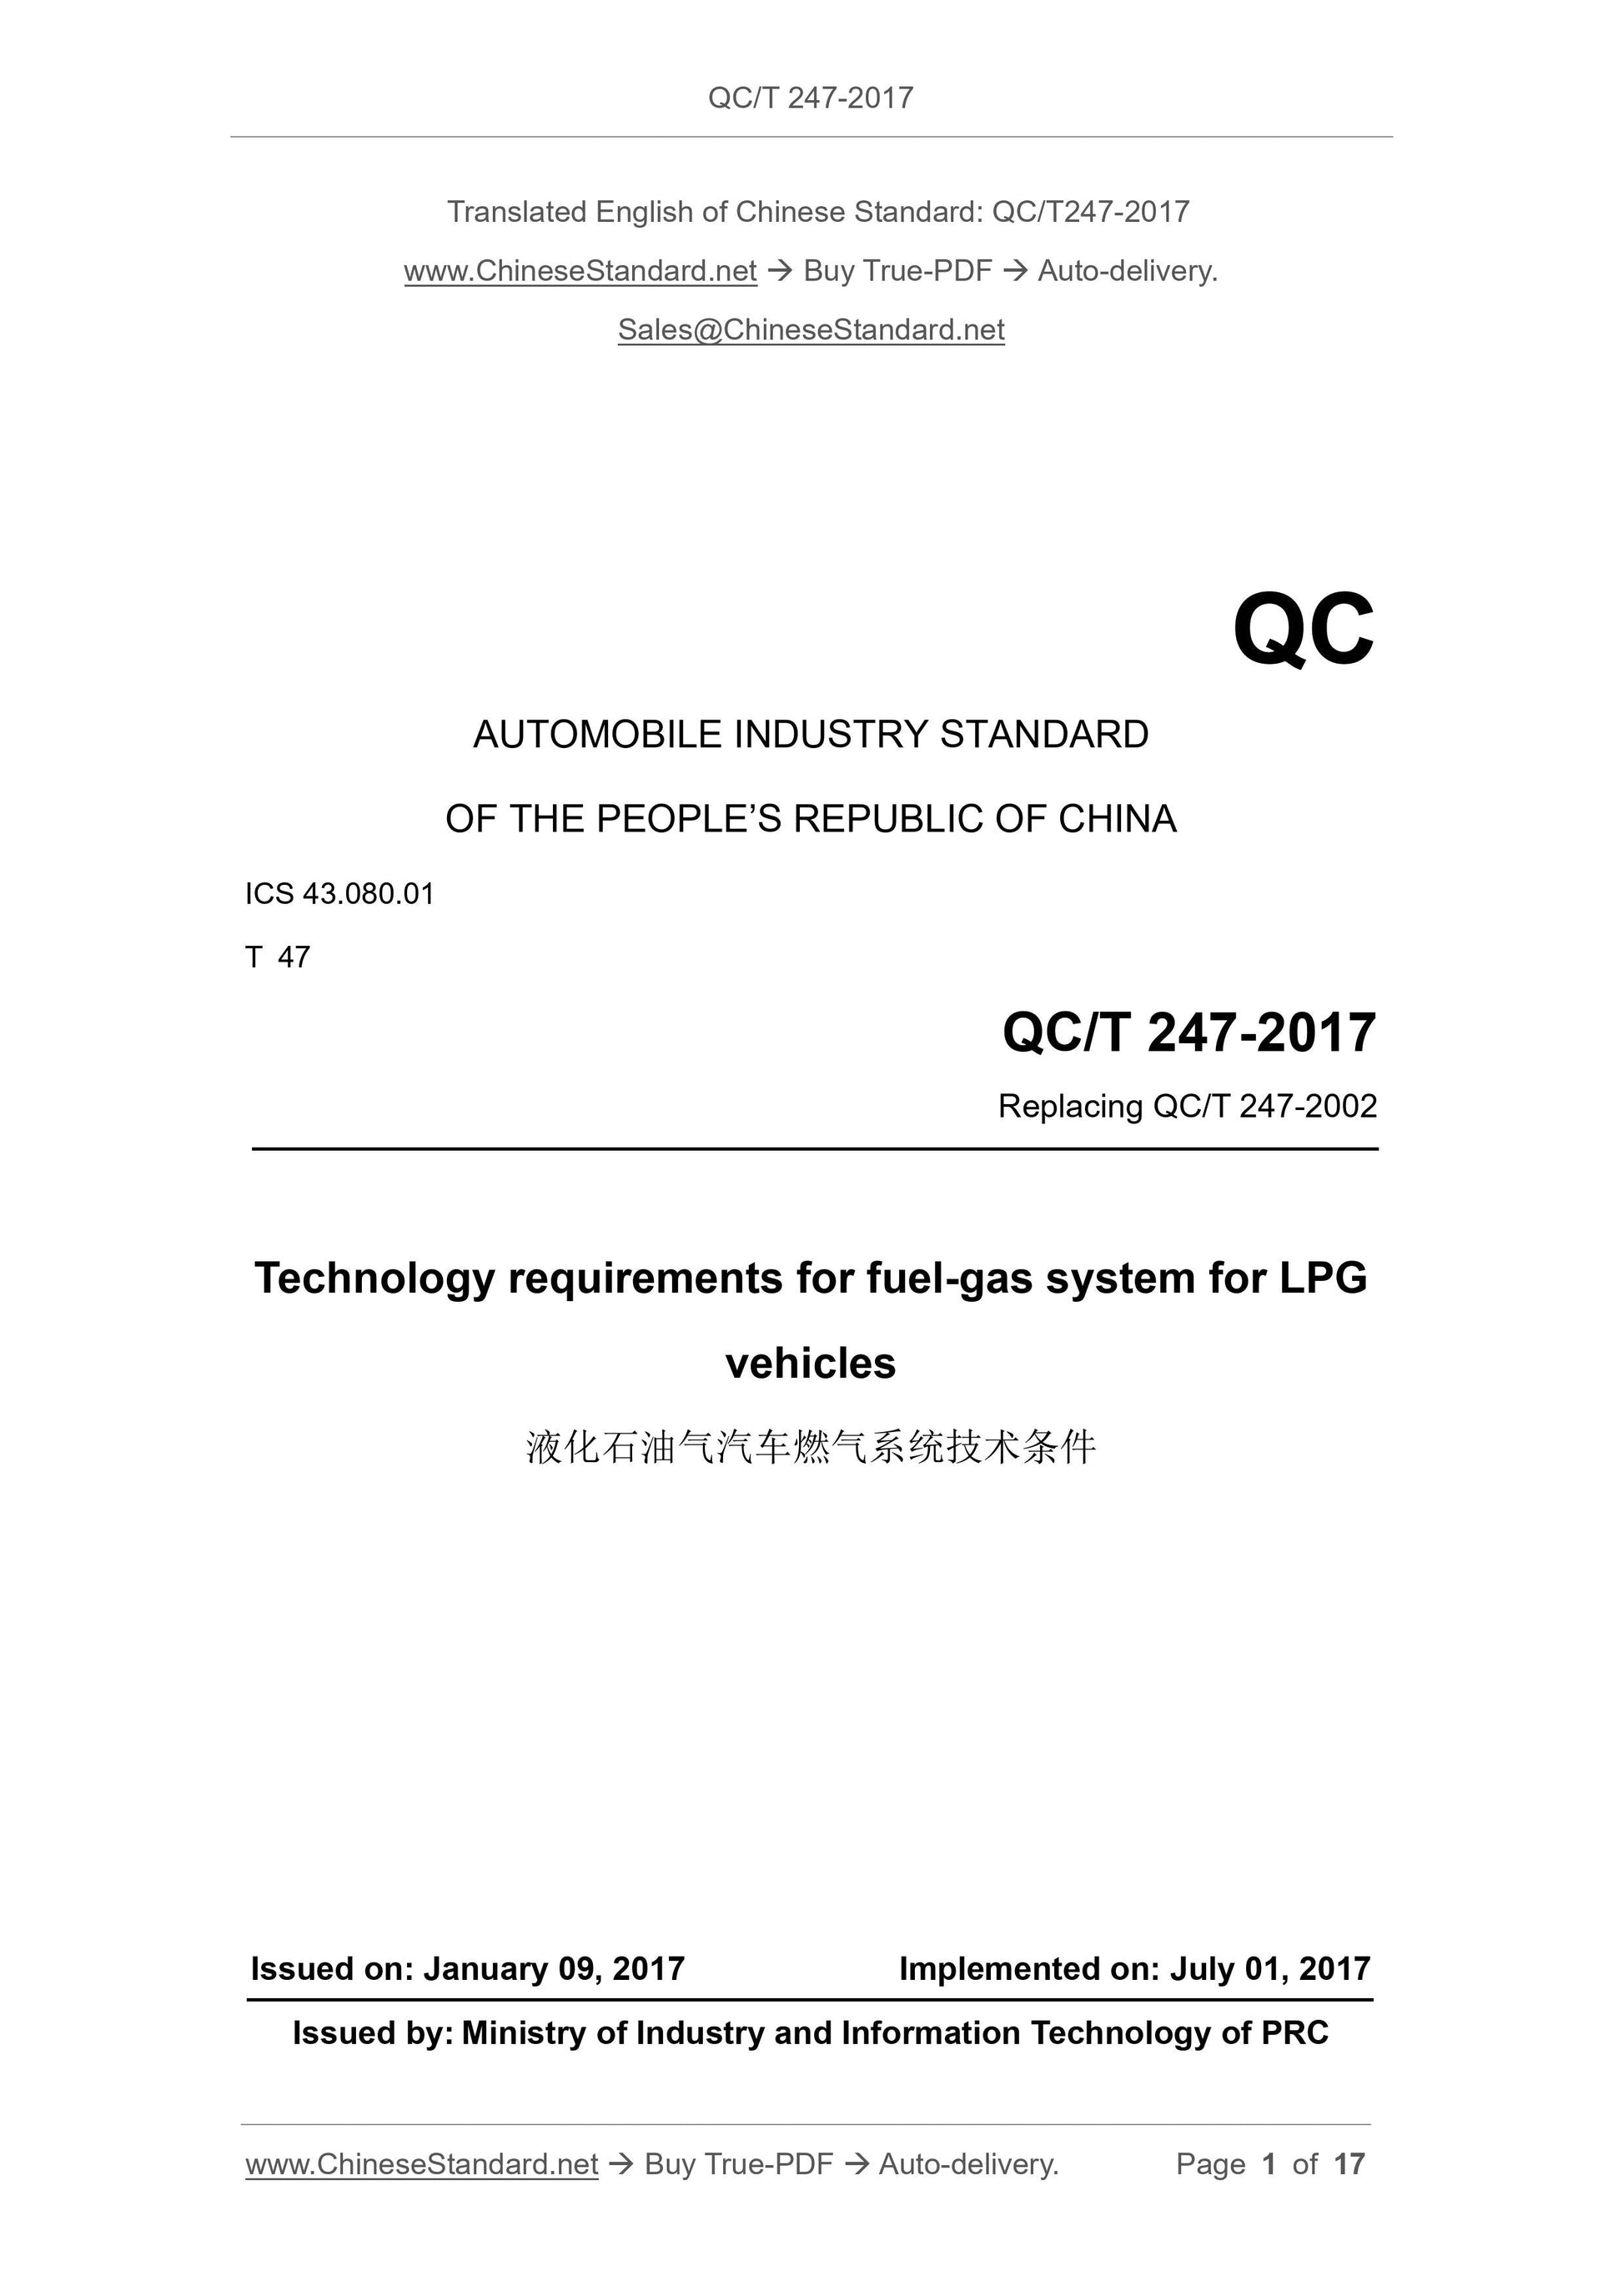 QC/T 247-2017 Page 1